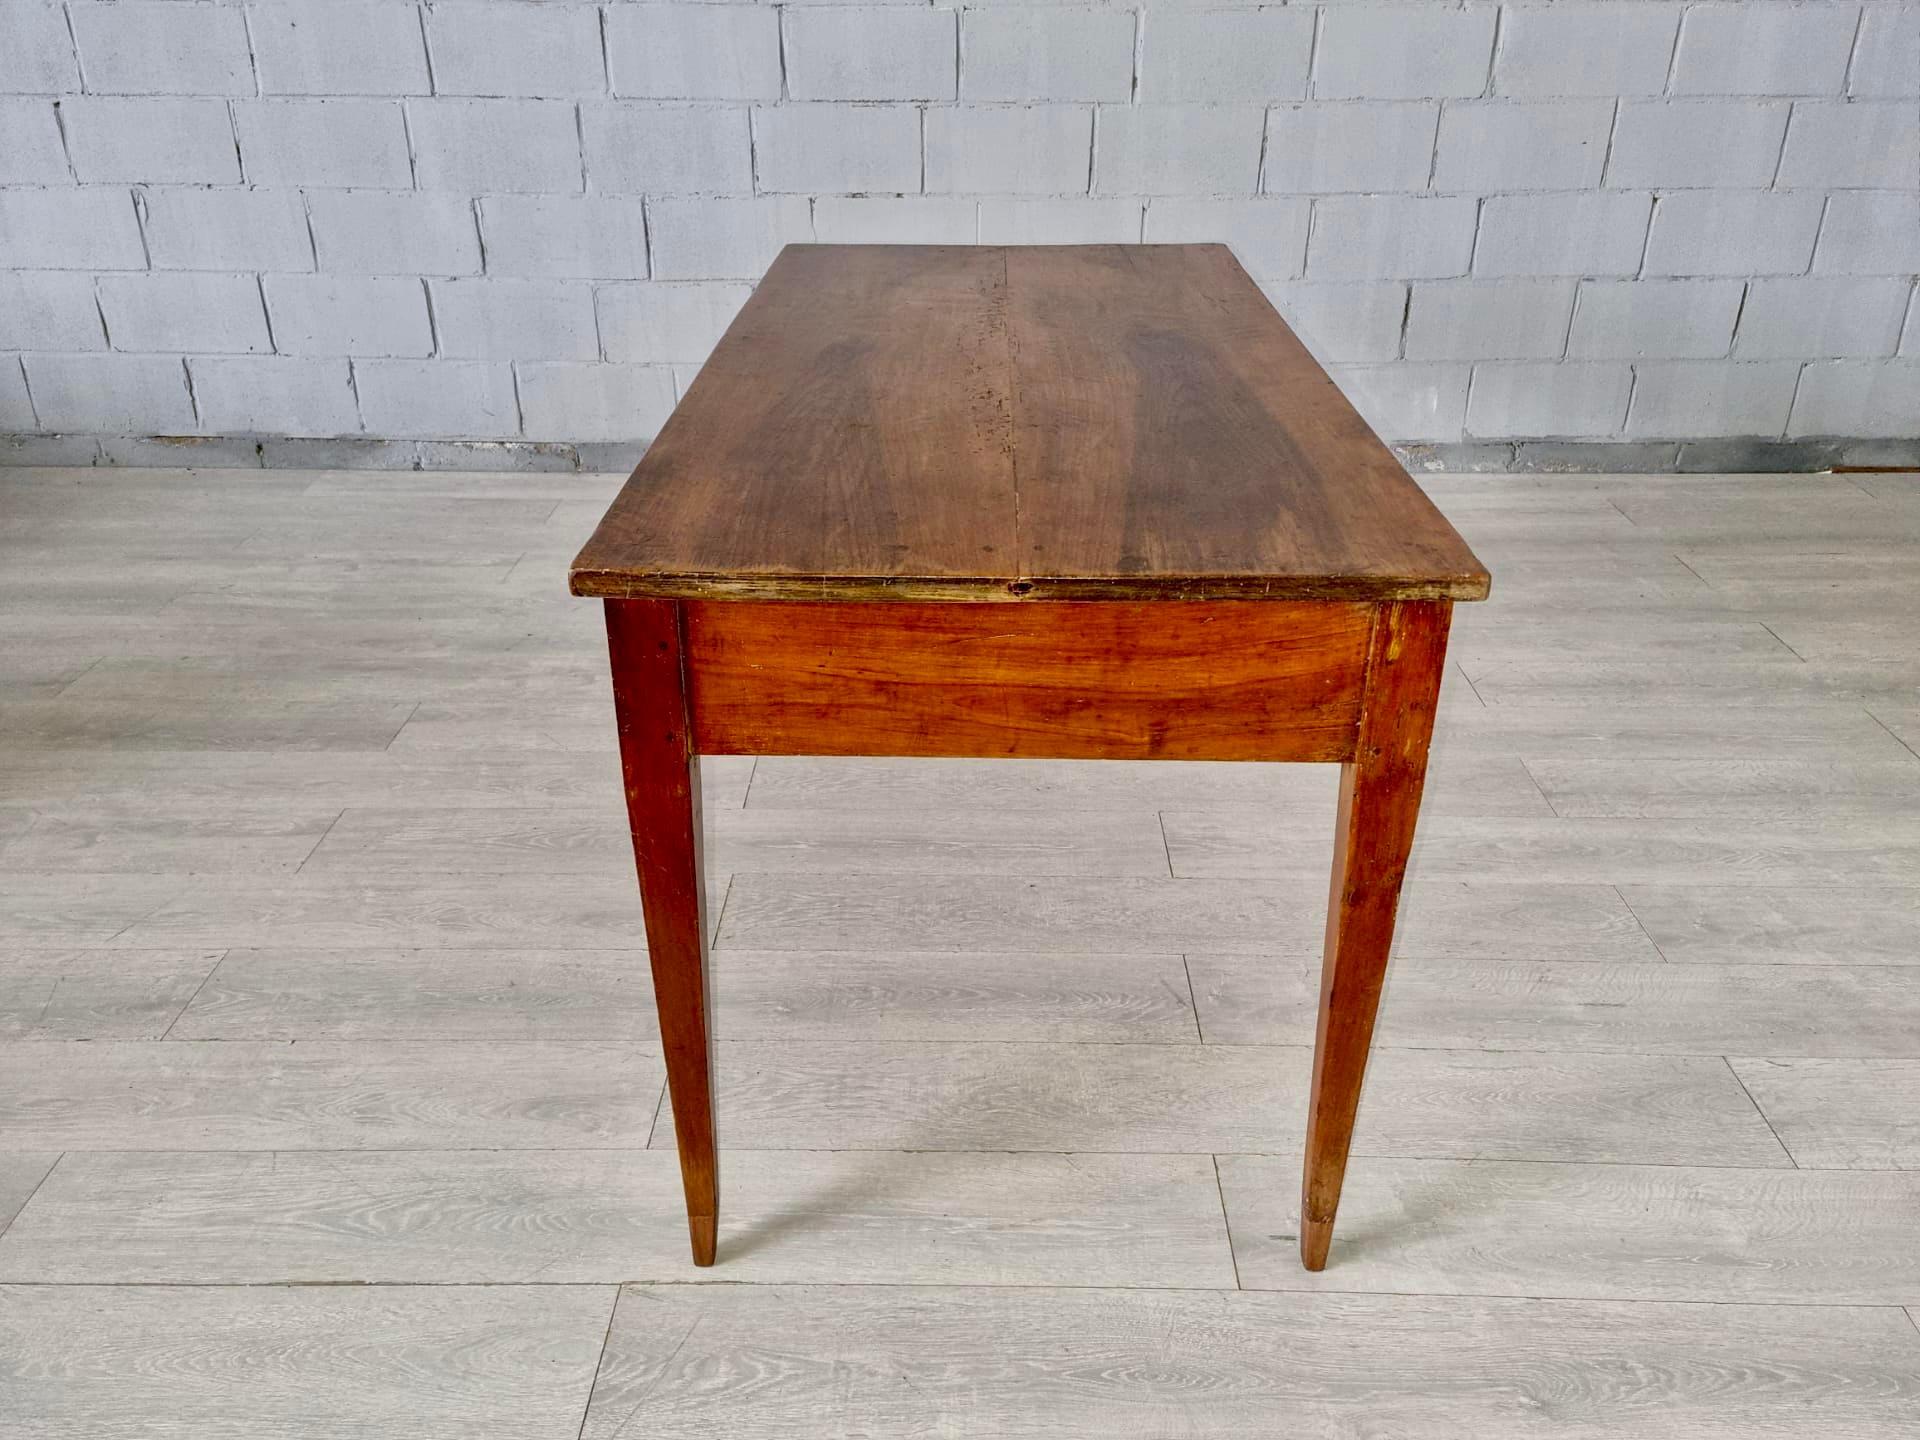 Walnut Antique Rustic French Provincial Kitchen Table or Side Table